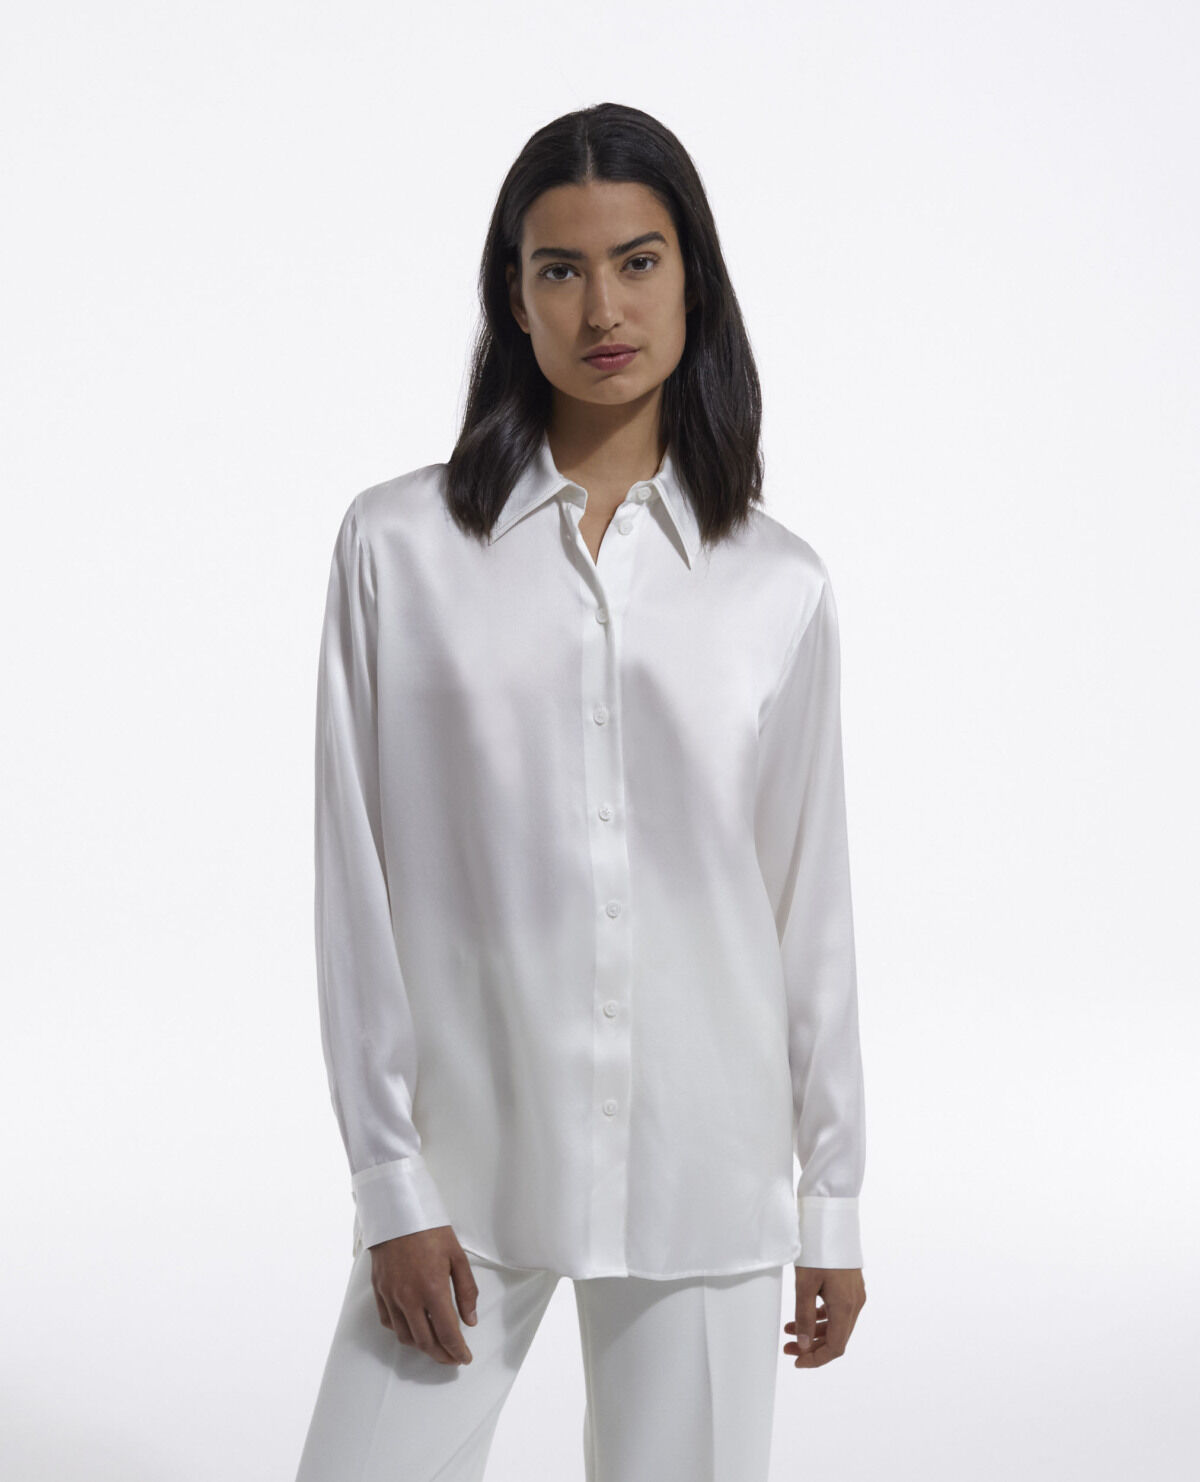 Loose white shirt with large cuffs | The Kooples